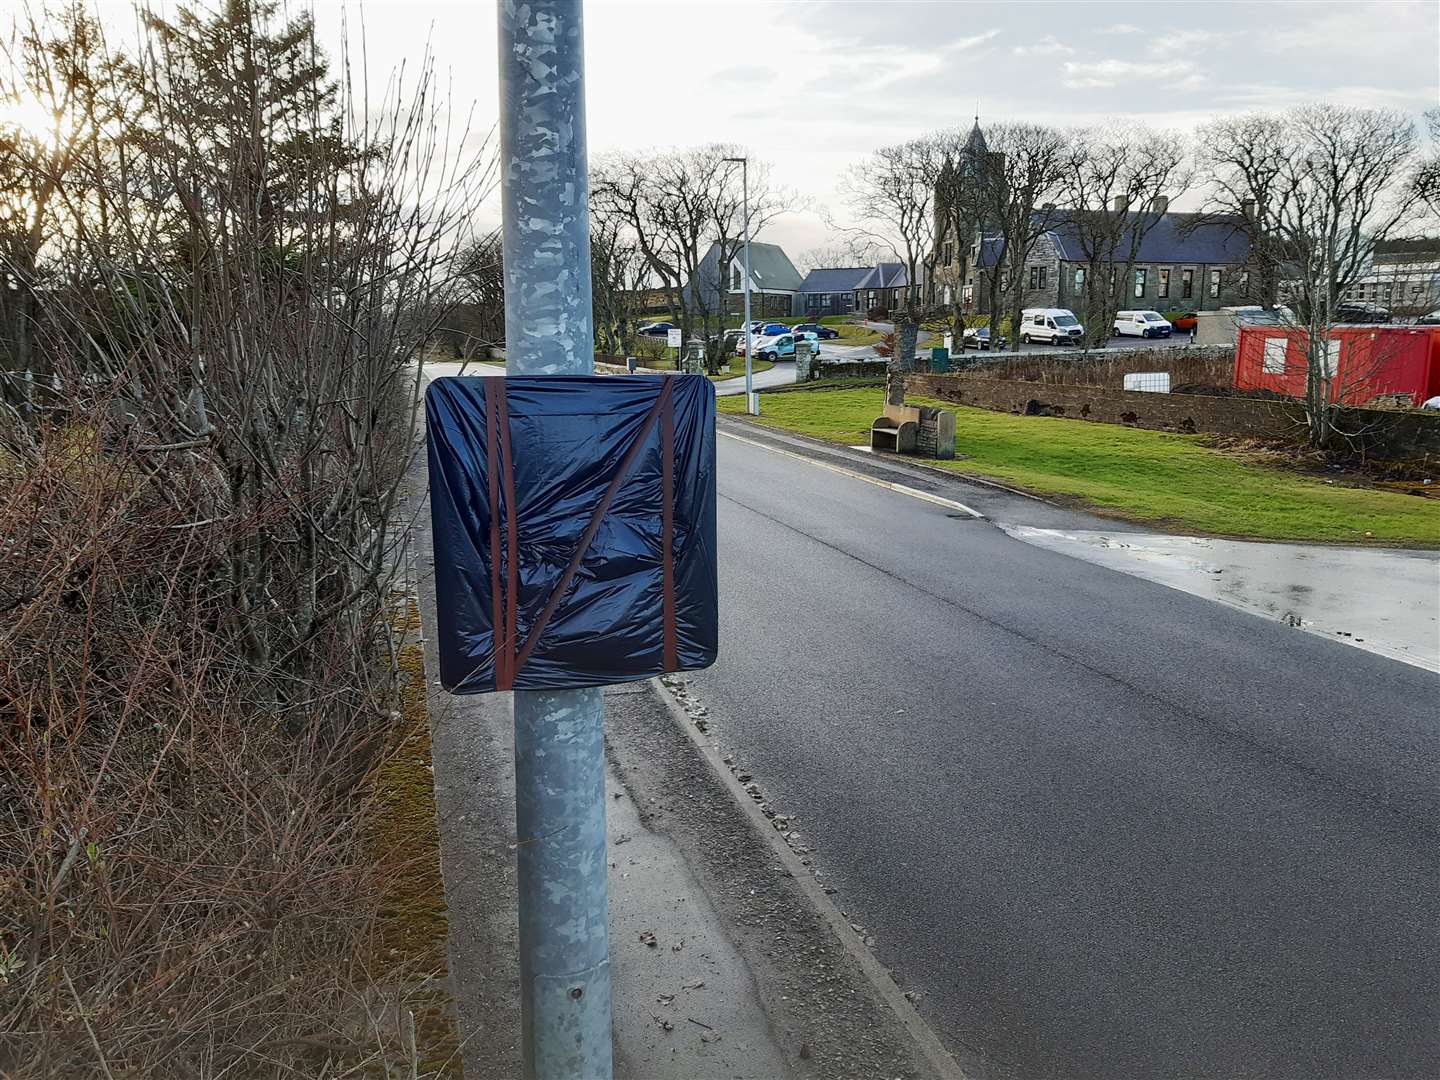 A light wounded unit sign concealed on Ormlie Road in Thurso, near the exit from Dunbar Hospital.